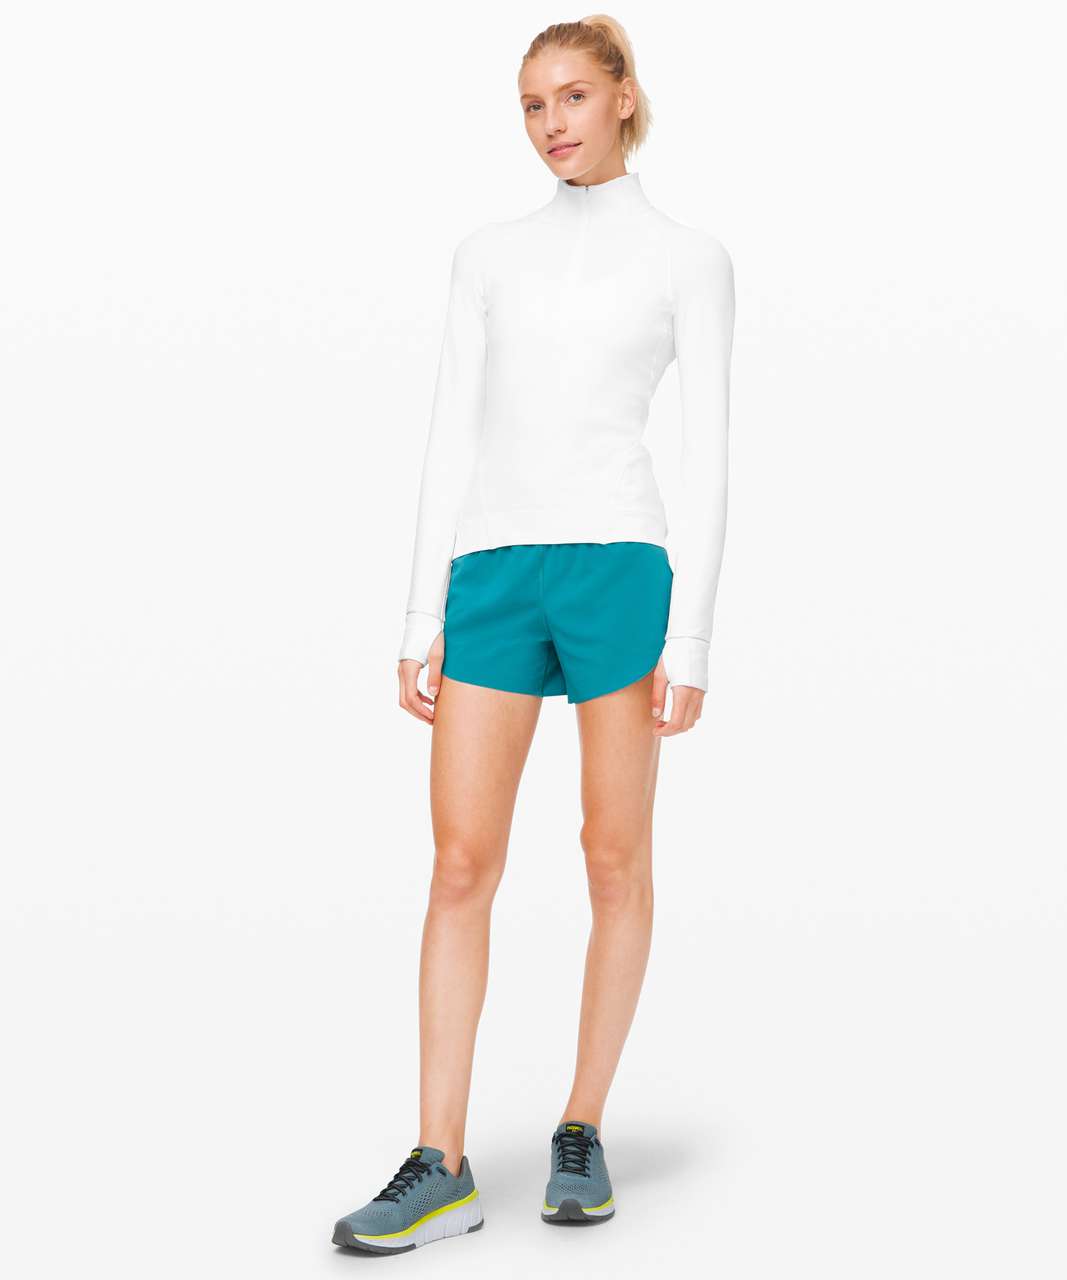 Lululemon Outrun the Elements 1/2 Zip - White